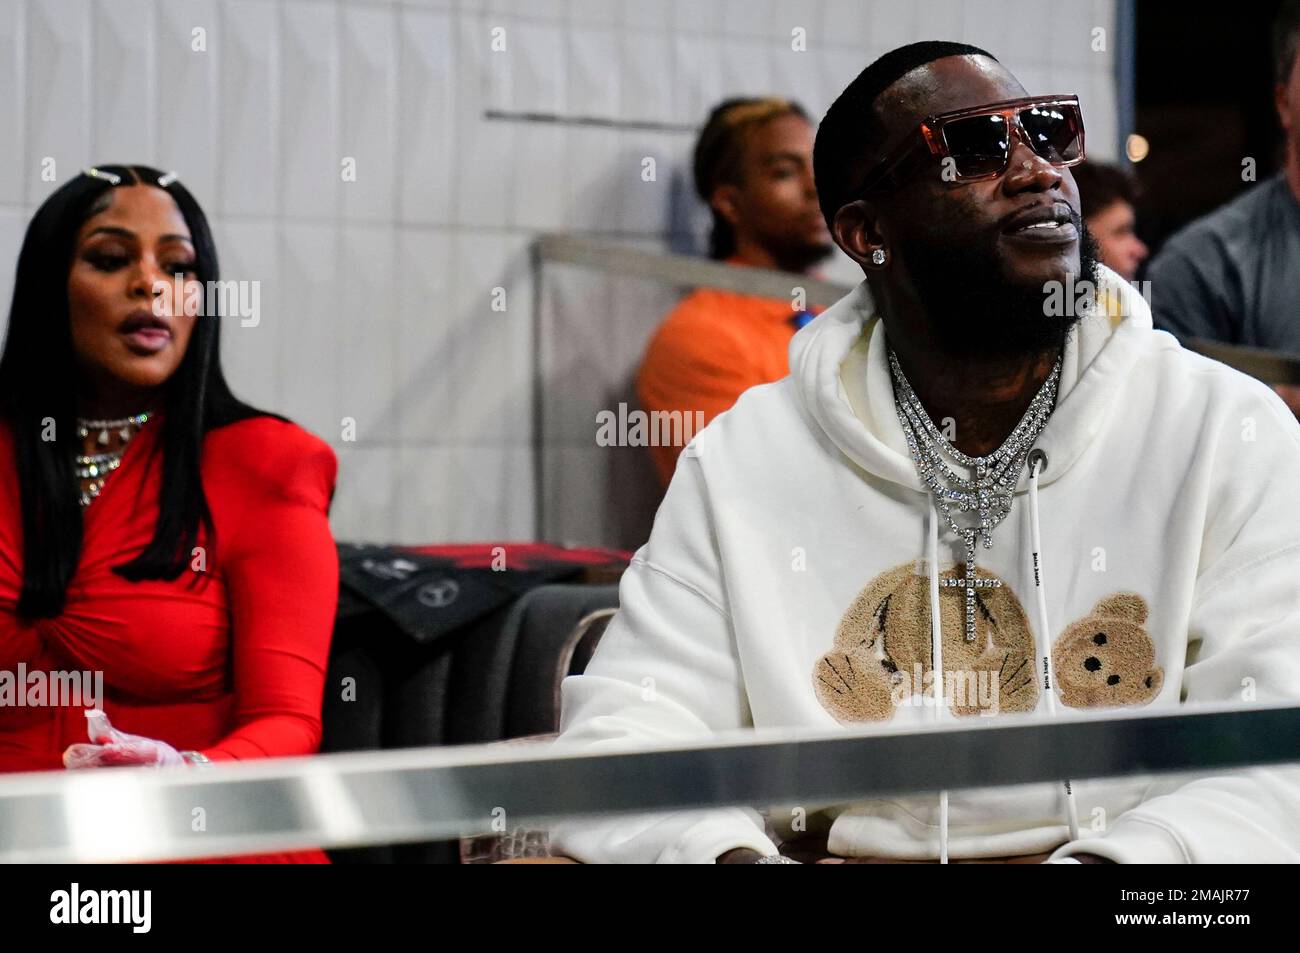 Rapper Gucci Mane watches play between the Atlanta Falcons and the